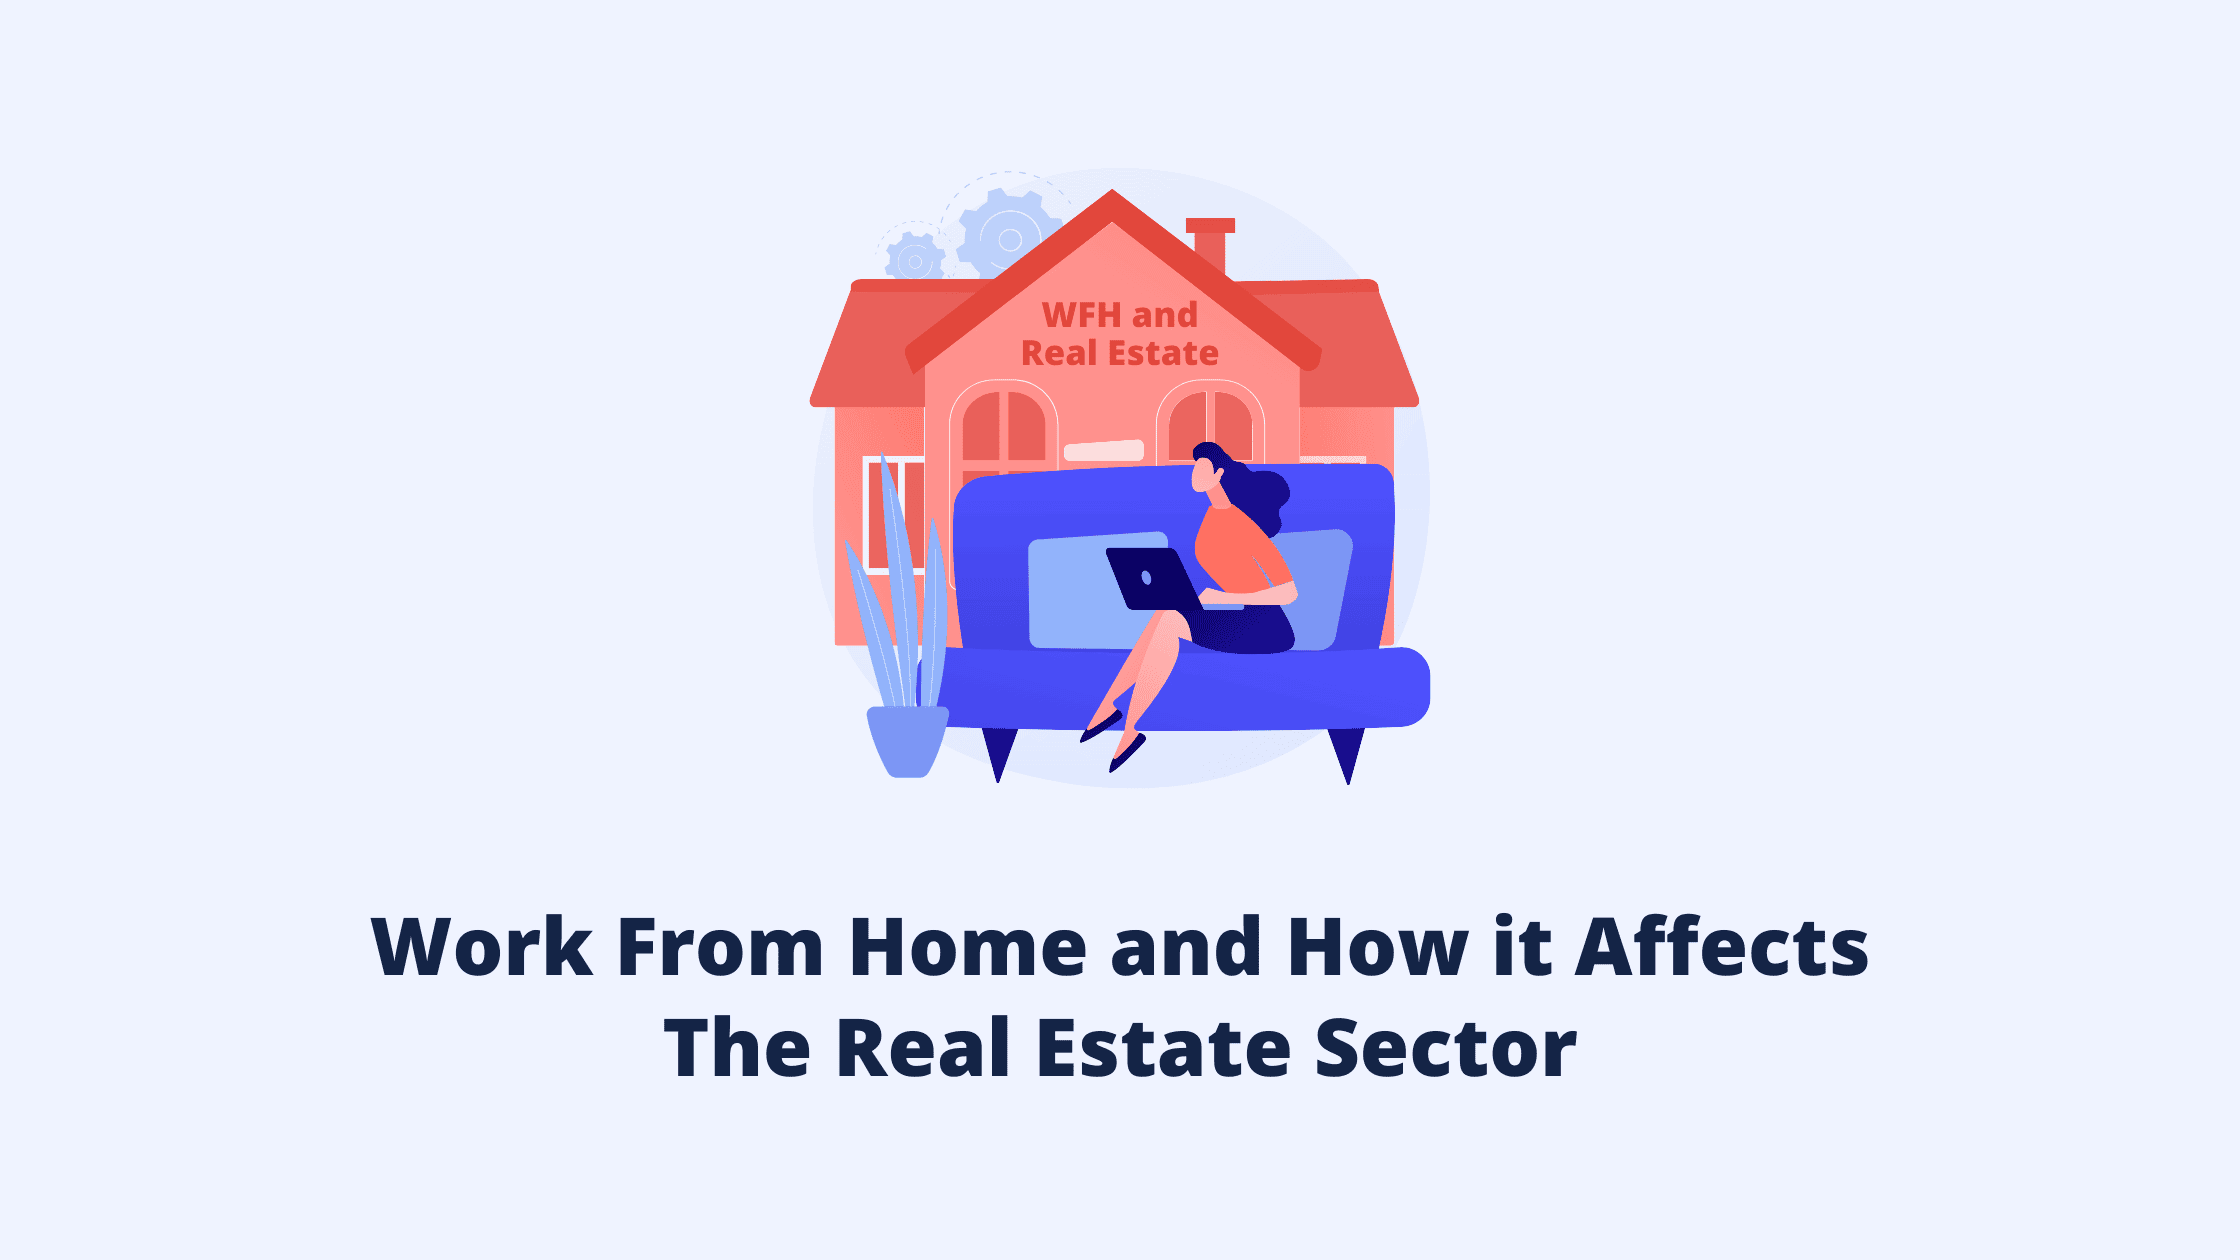 Work From Home and How it Affects The Real Estate Sector